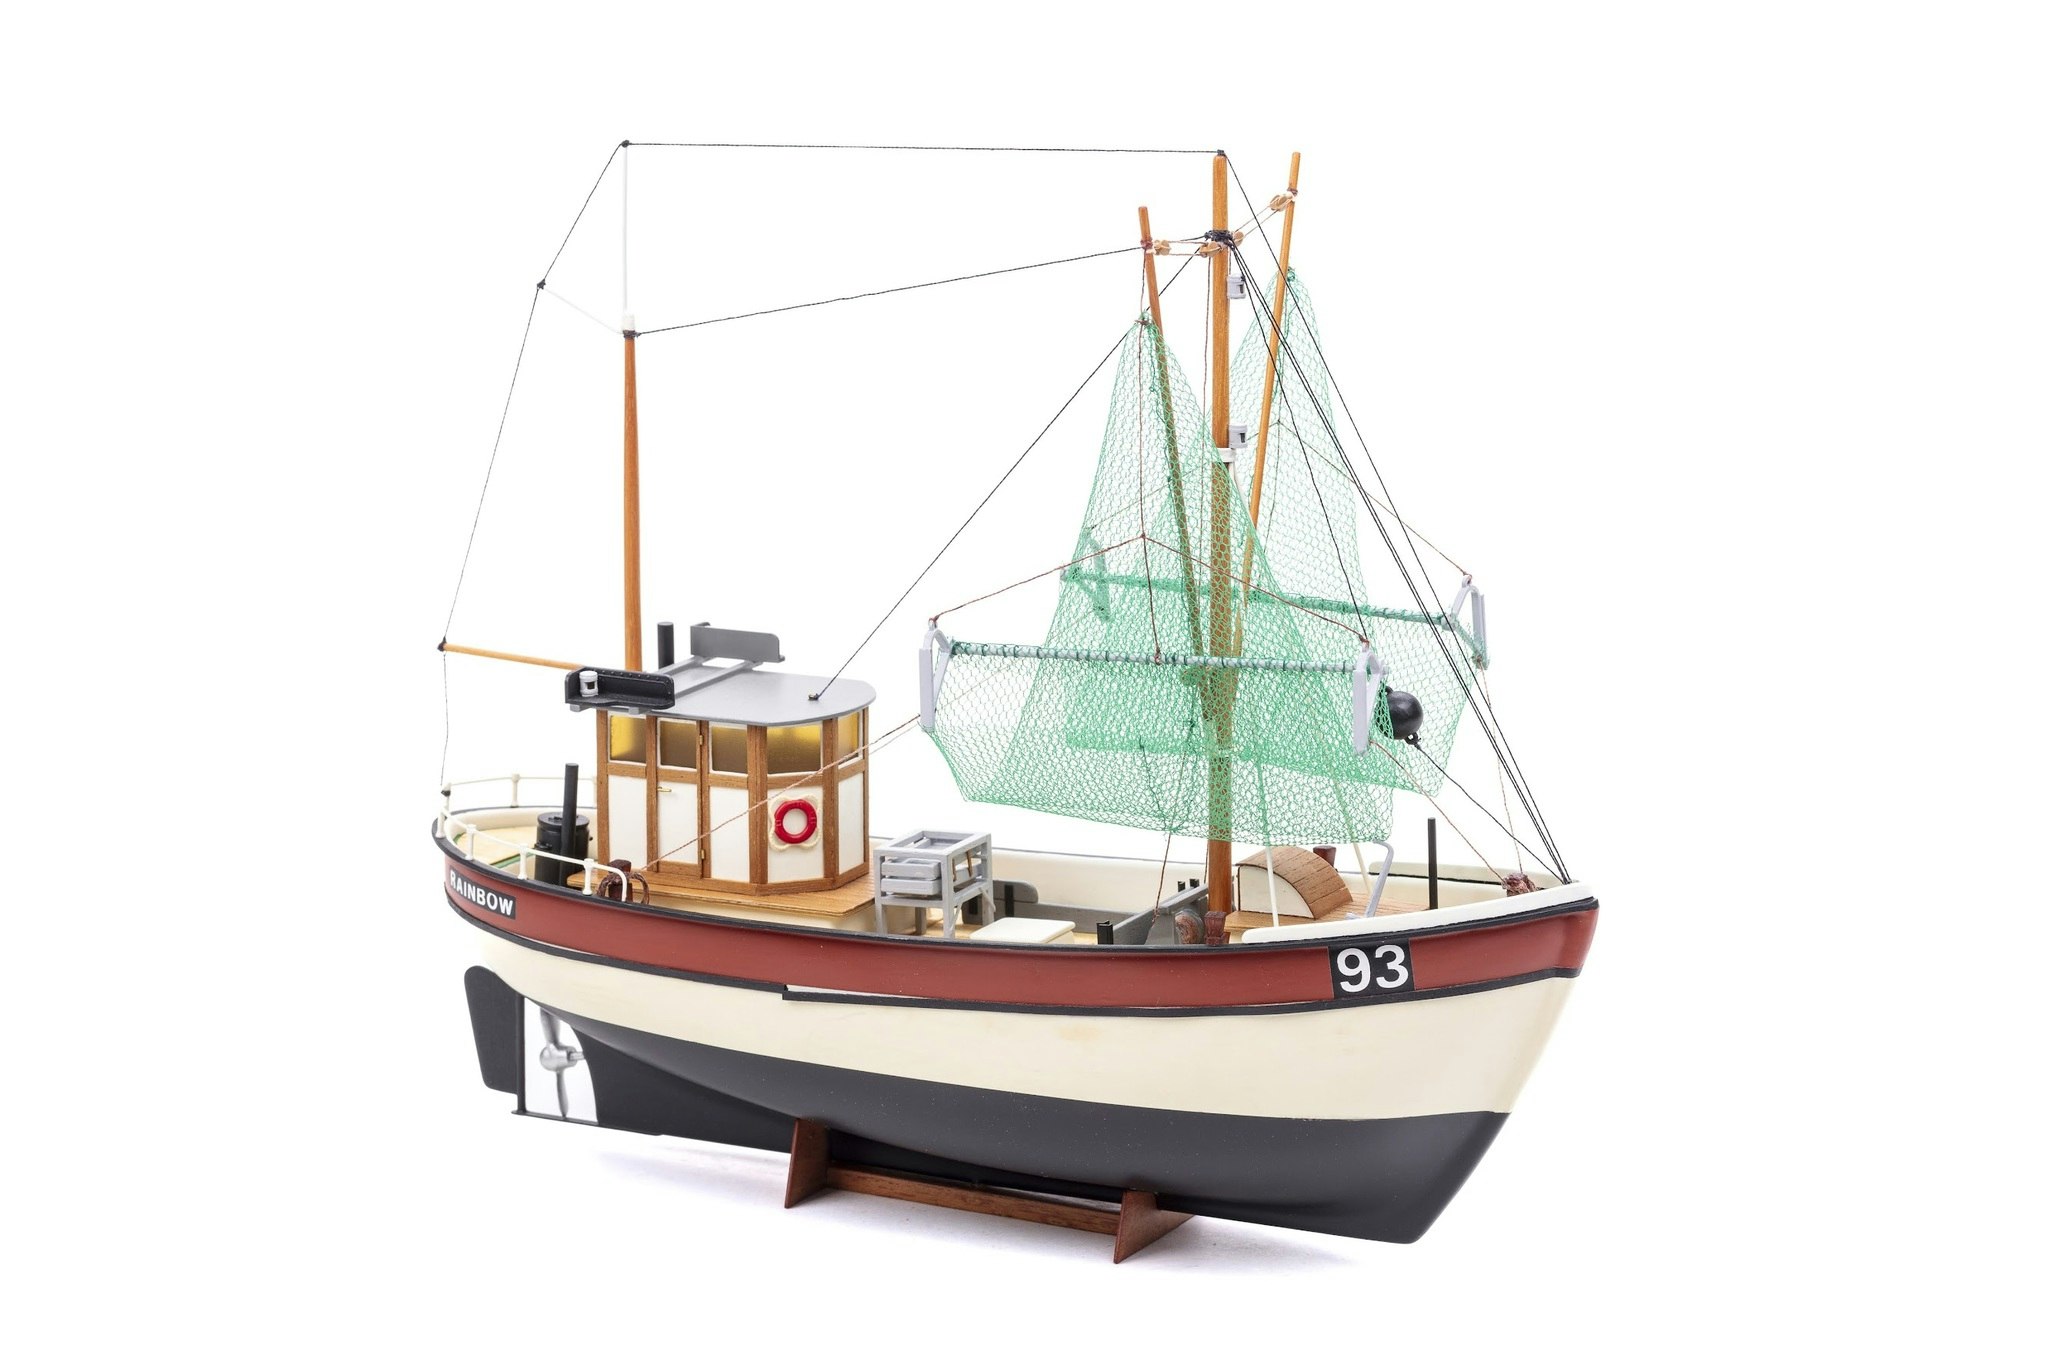 Scale 1/30 Constructionmodel of Rainbow 201, Fishing Boat - from Billing Boats